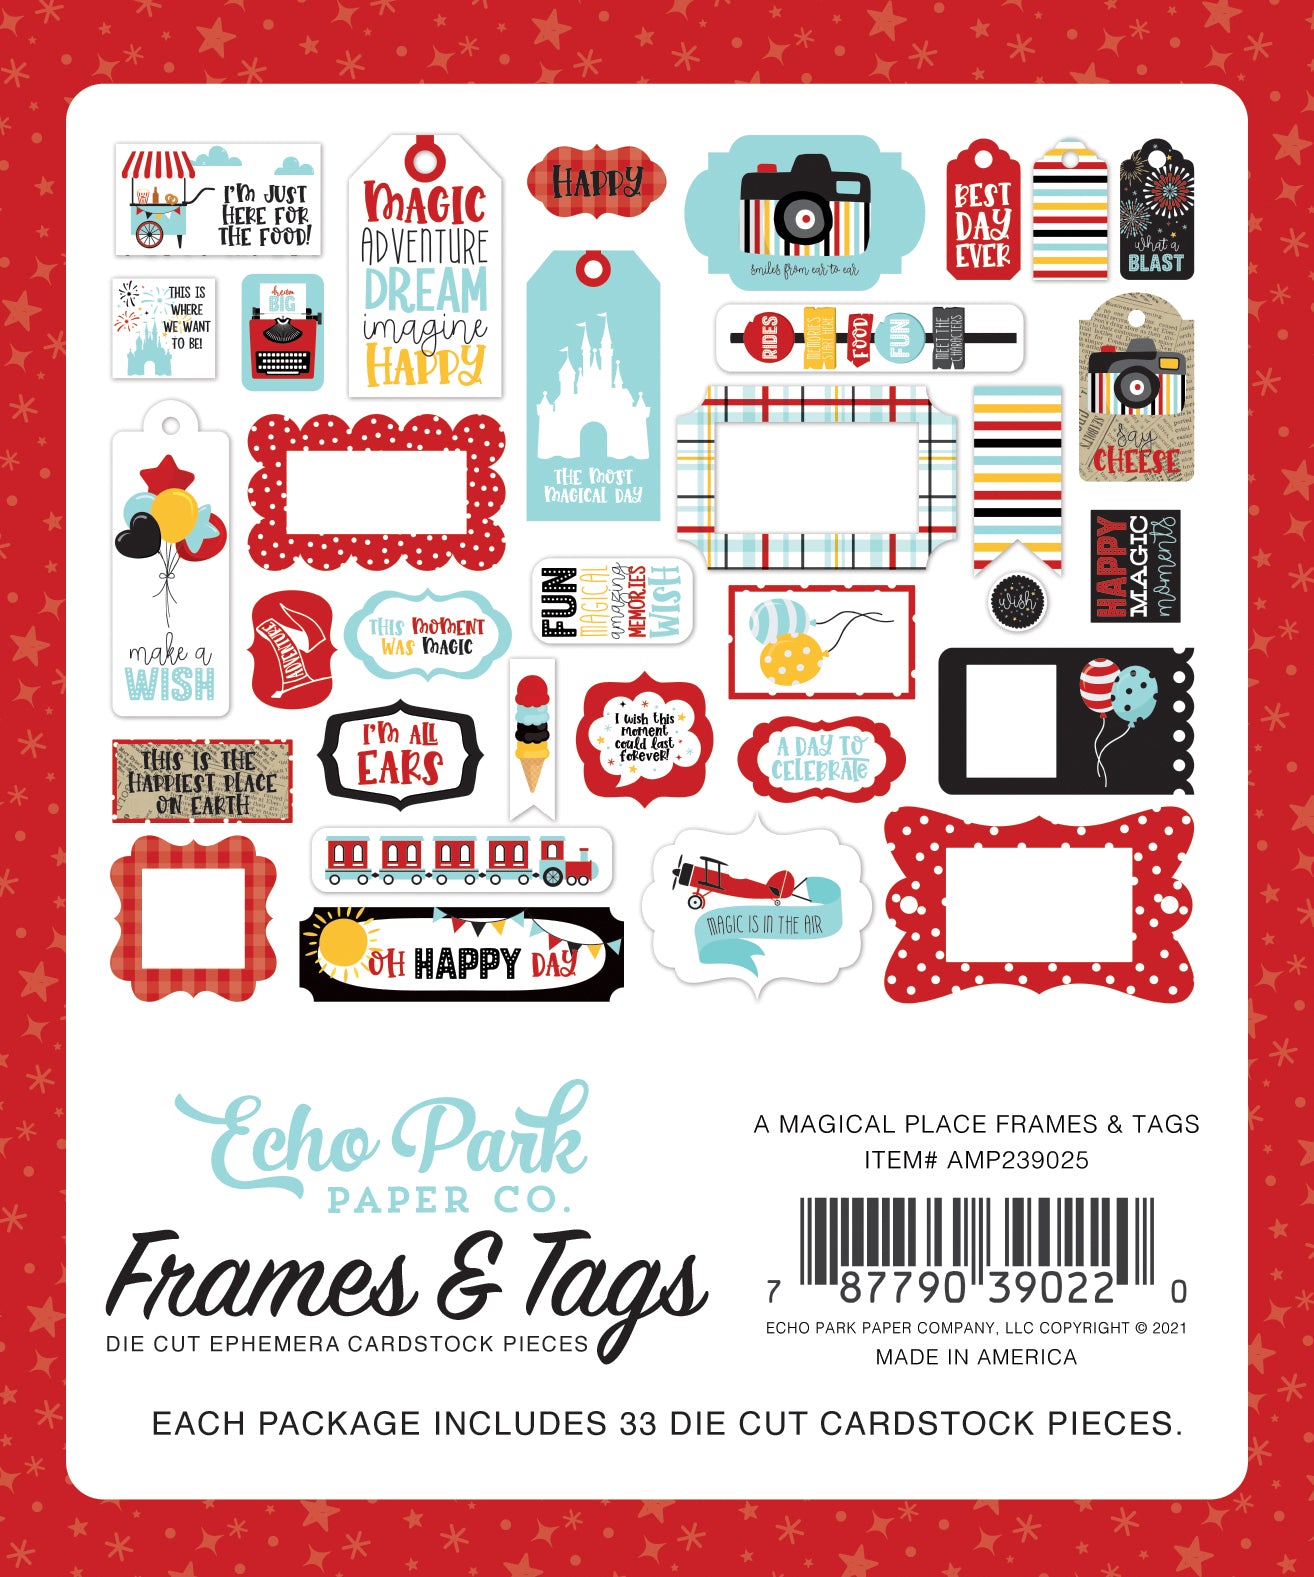 A Magical Place Frames & Tags Die Cut Cardstock Pack.  Pack includes 33 different die-cut shapes ready to embellish any project.